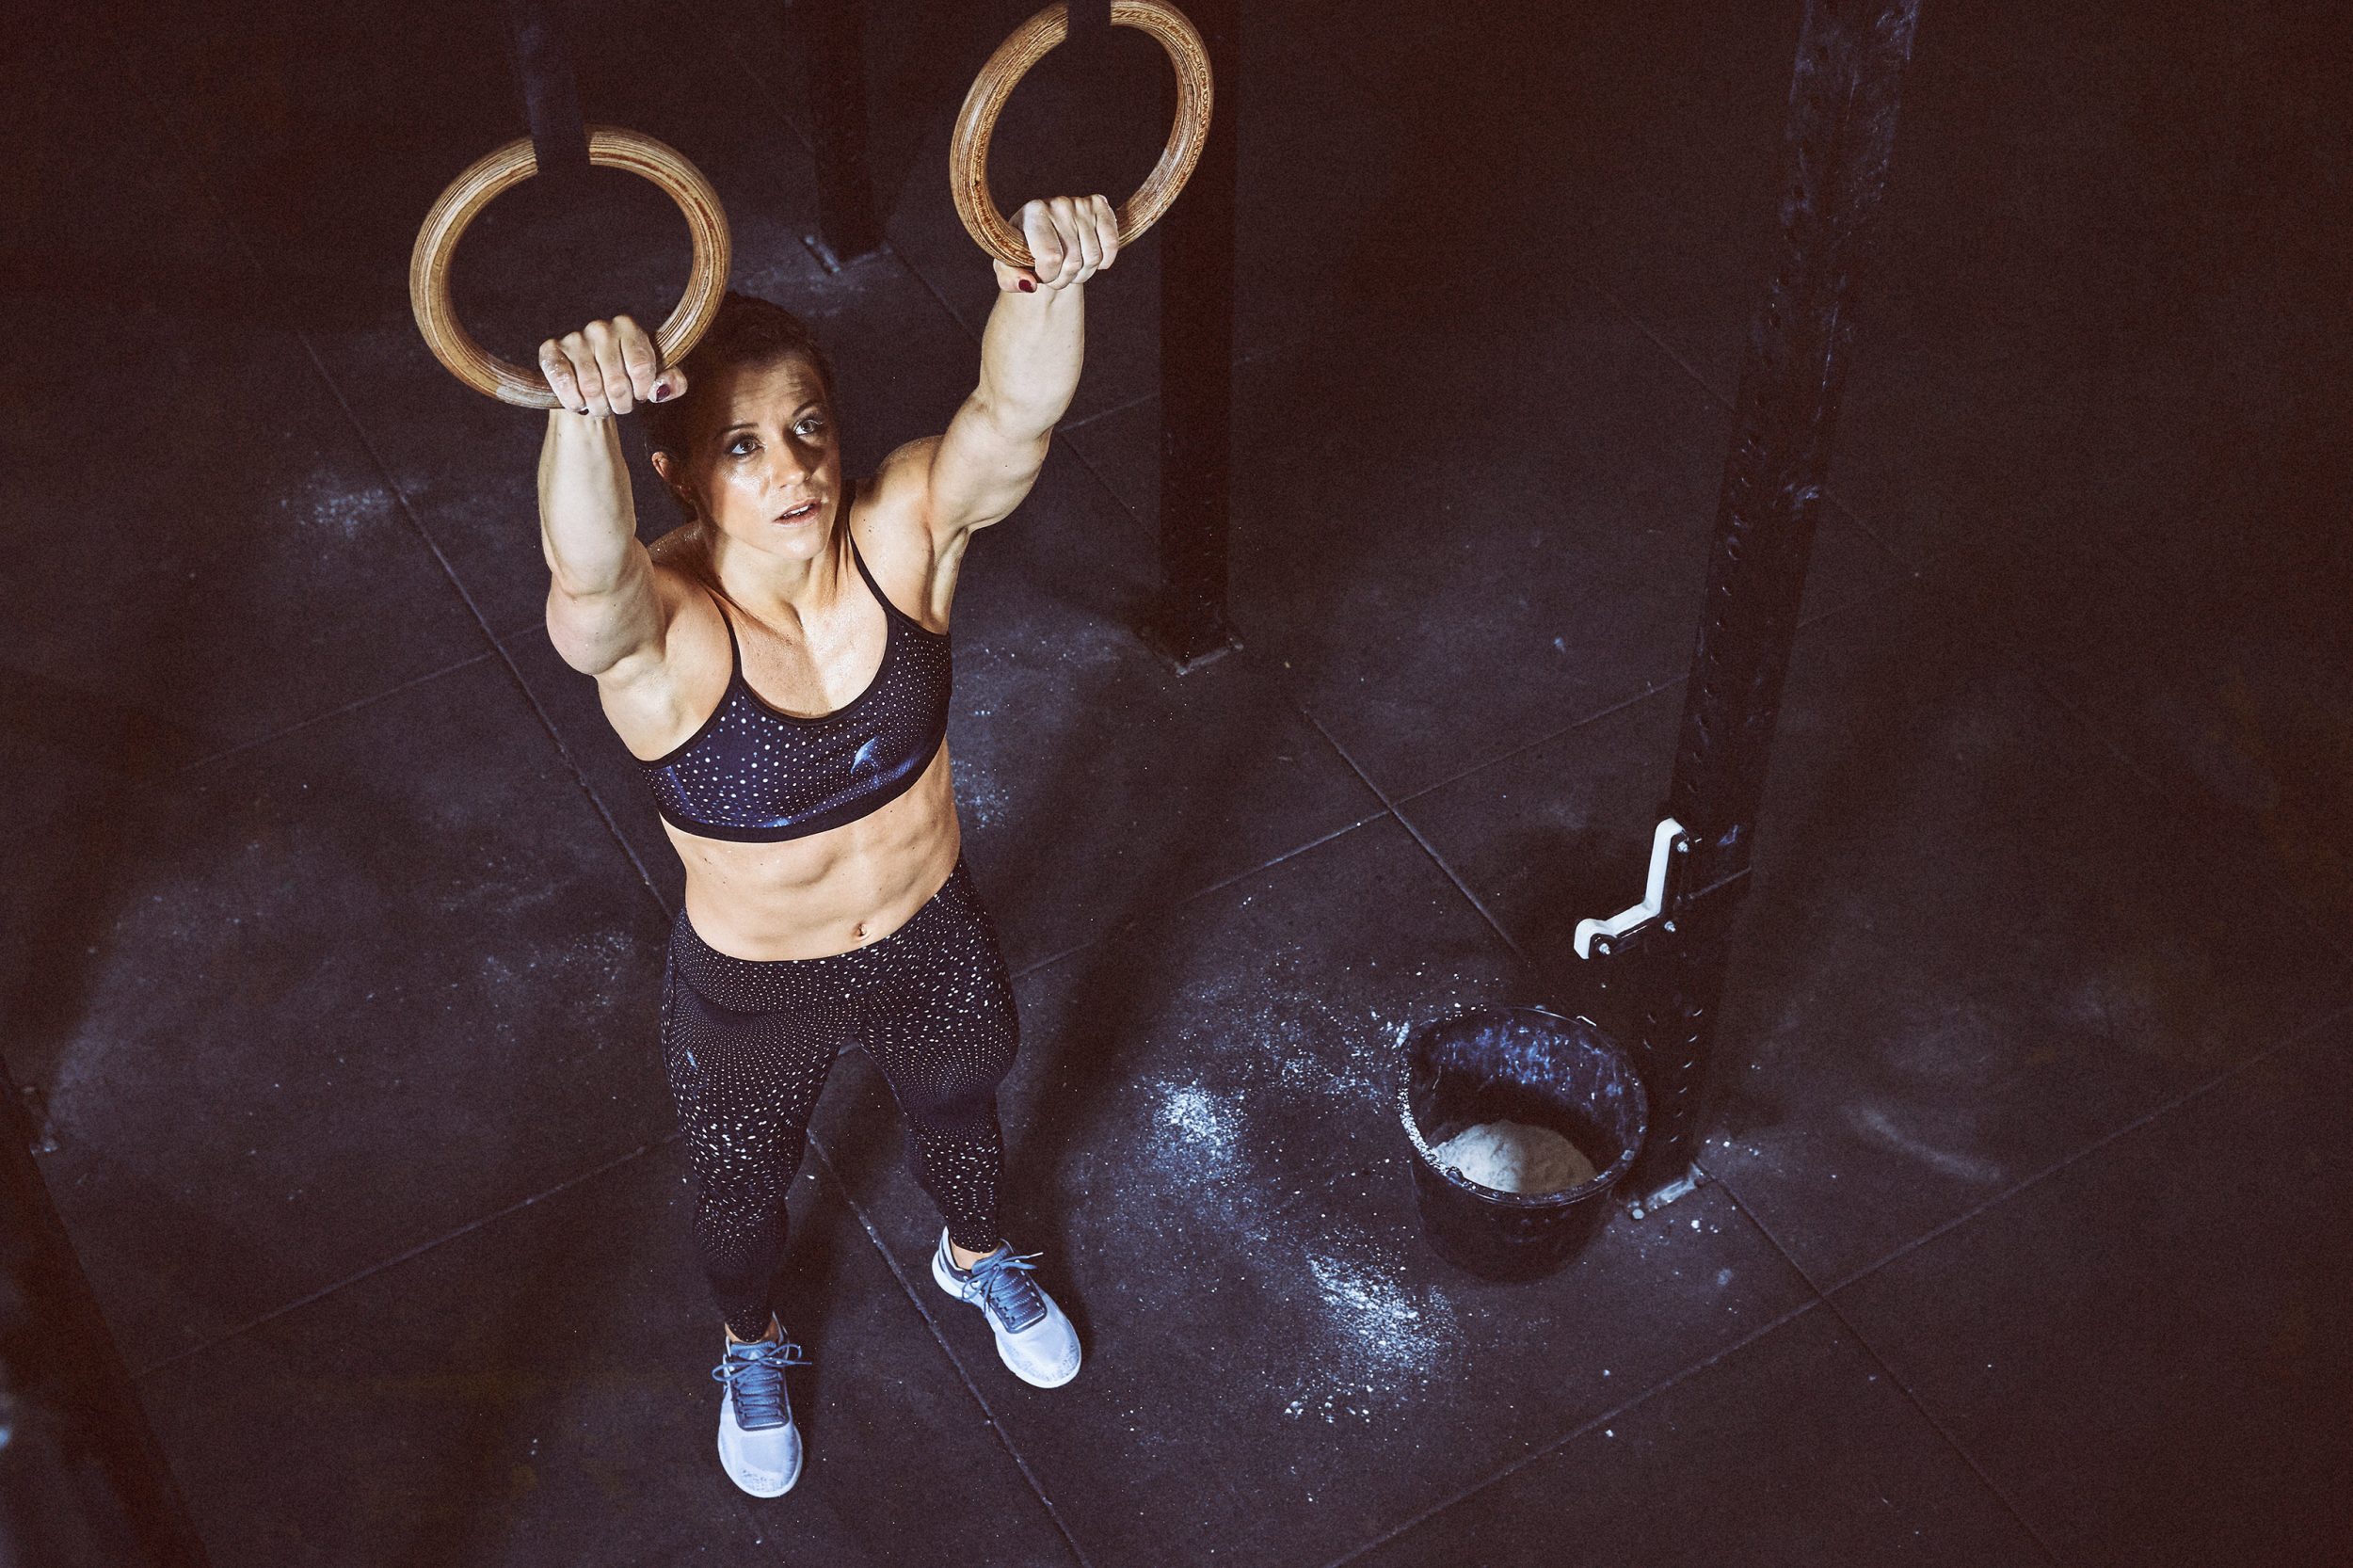 Kristin Holte for Reebok Crossfit